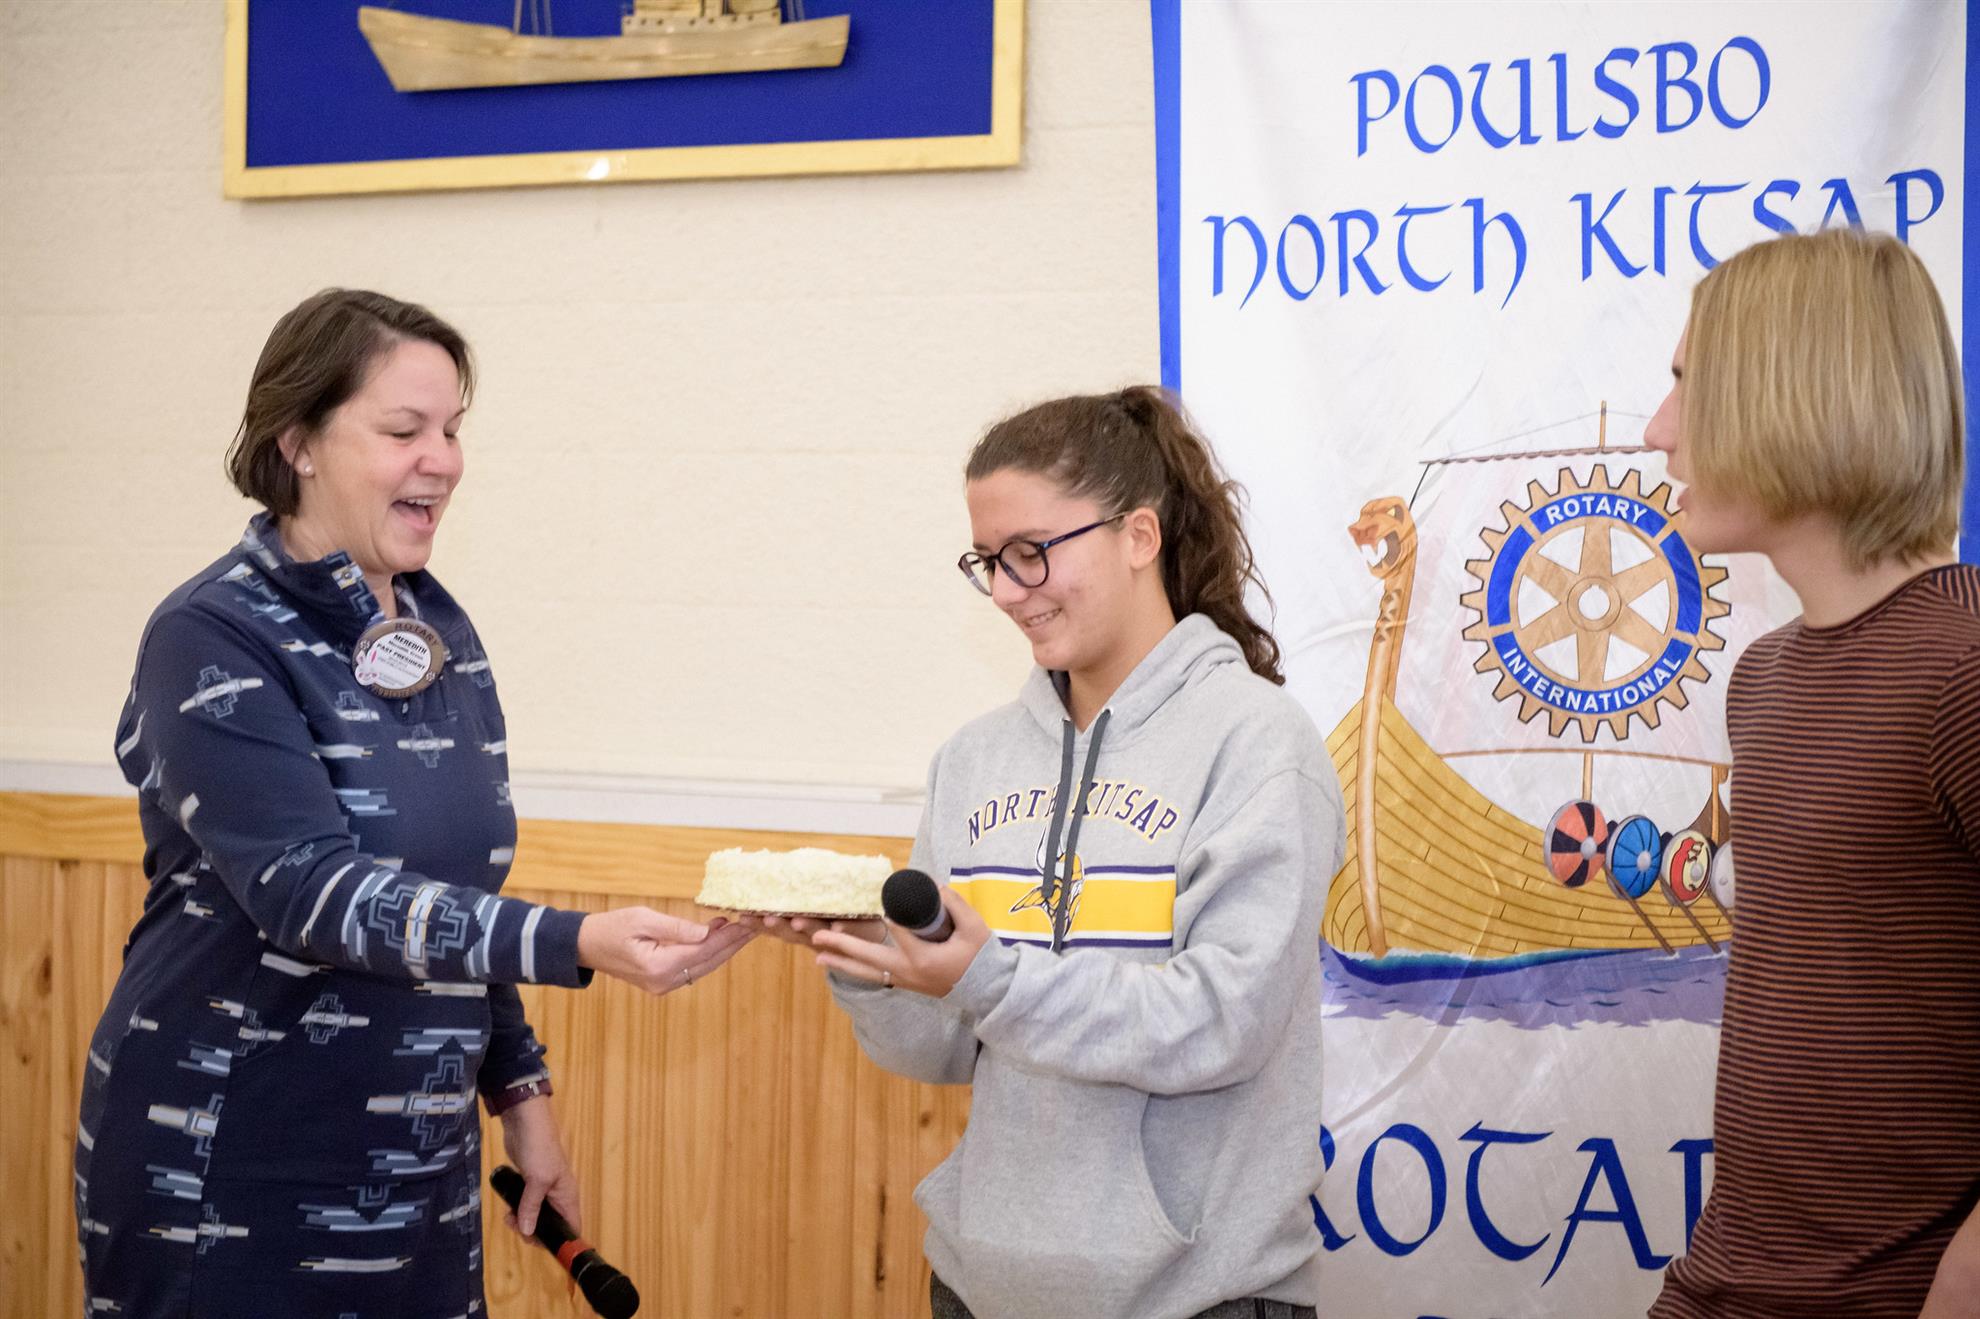 Shaved Teen Spread Legs - Stories | Rotary Club of Poulsbo-North Kitsap